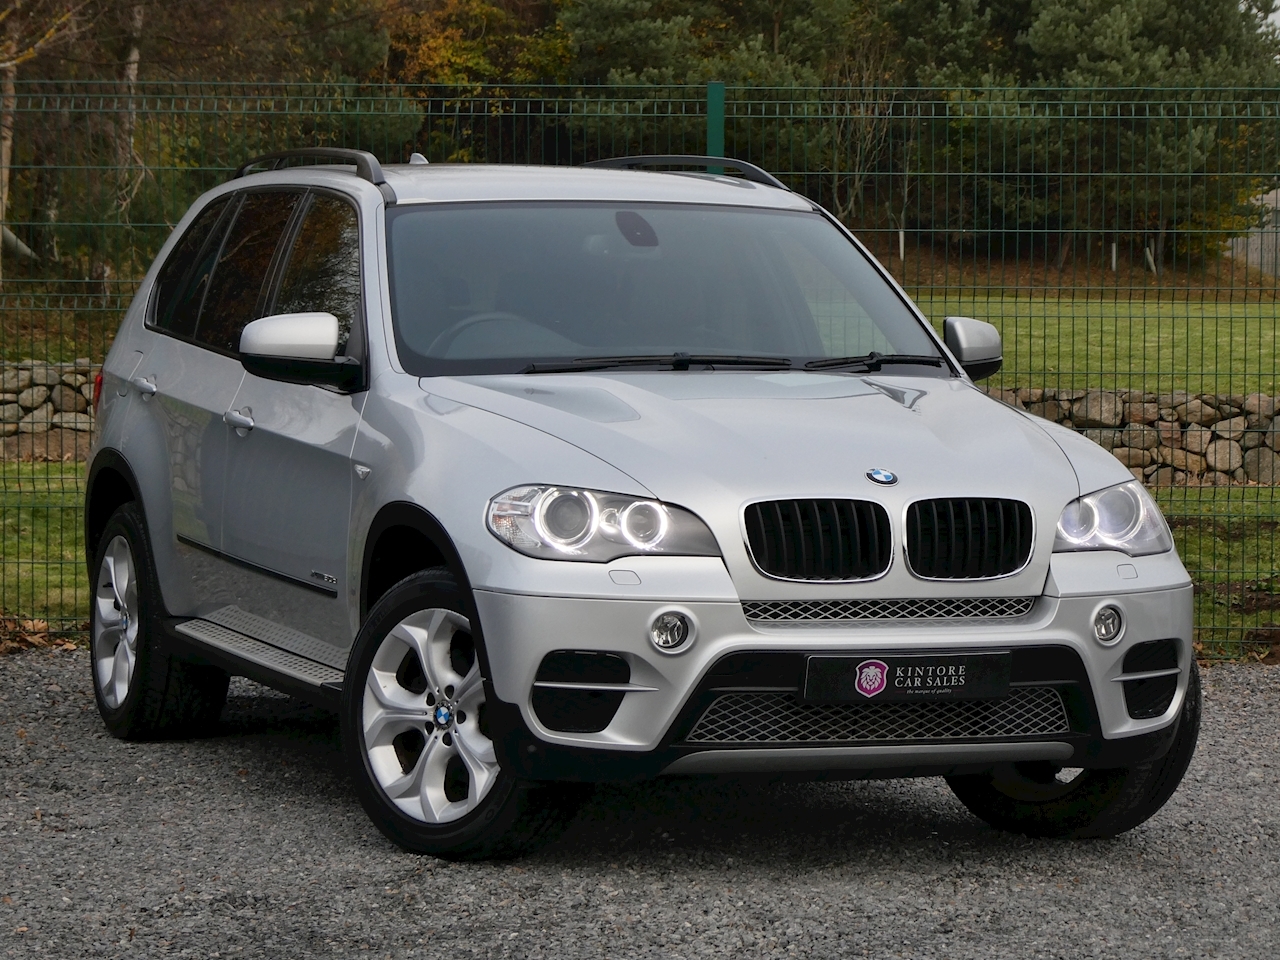 X5 30d 3.0 SE xDrive, Automatic (7 Seats) 3.0 5dr SUV Automatic Diesel